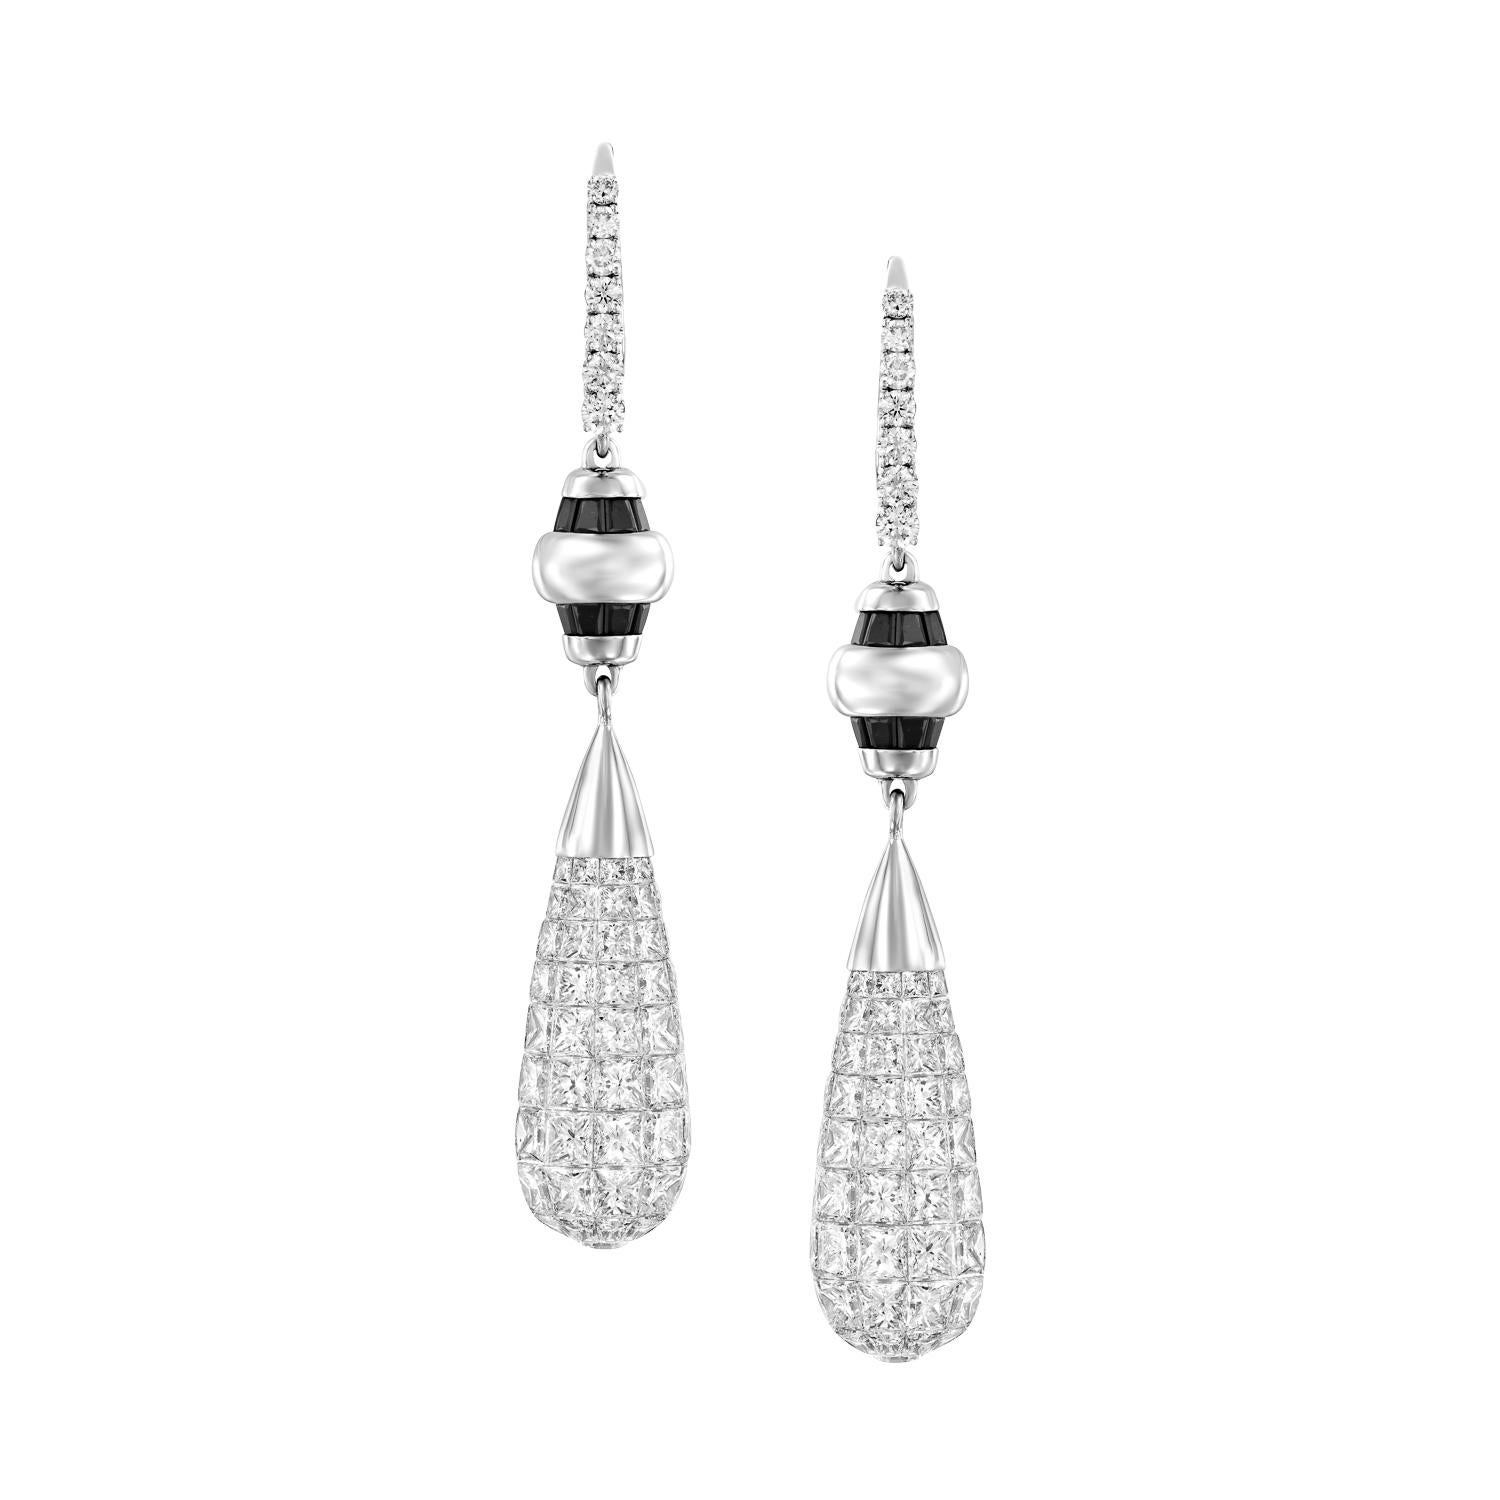 Elevate your style to new heights with the Geraldo 23.15 Carat Briolettes Diamond Invisible Setting Earrings, a true masterpiece of jewelry design. These earrings are a stunning showcase of diamond craftsmanship, with invisible-set princess diamonds